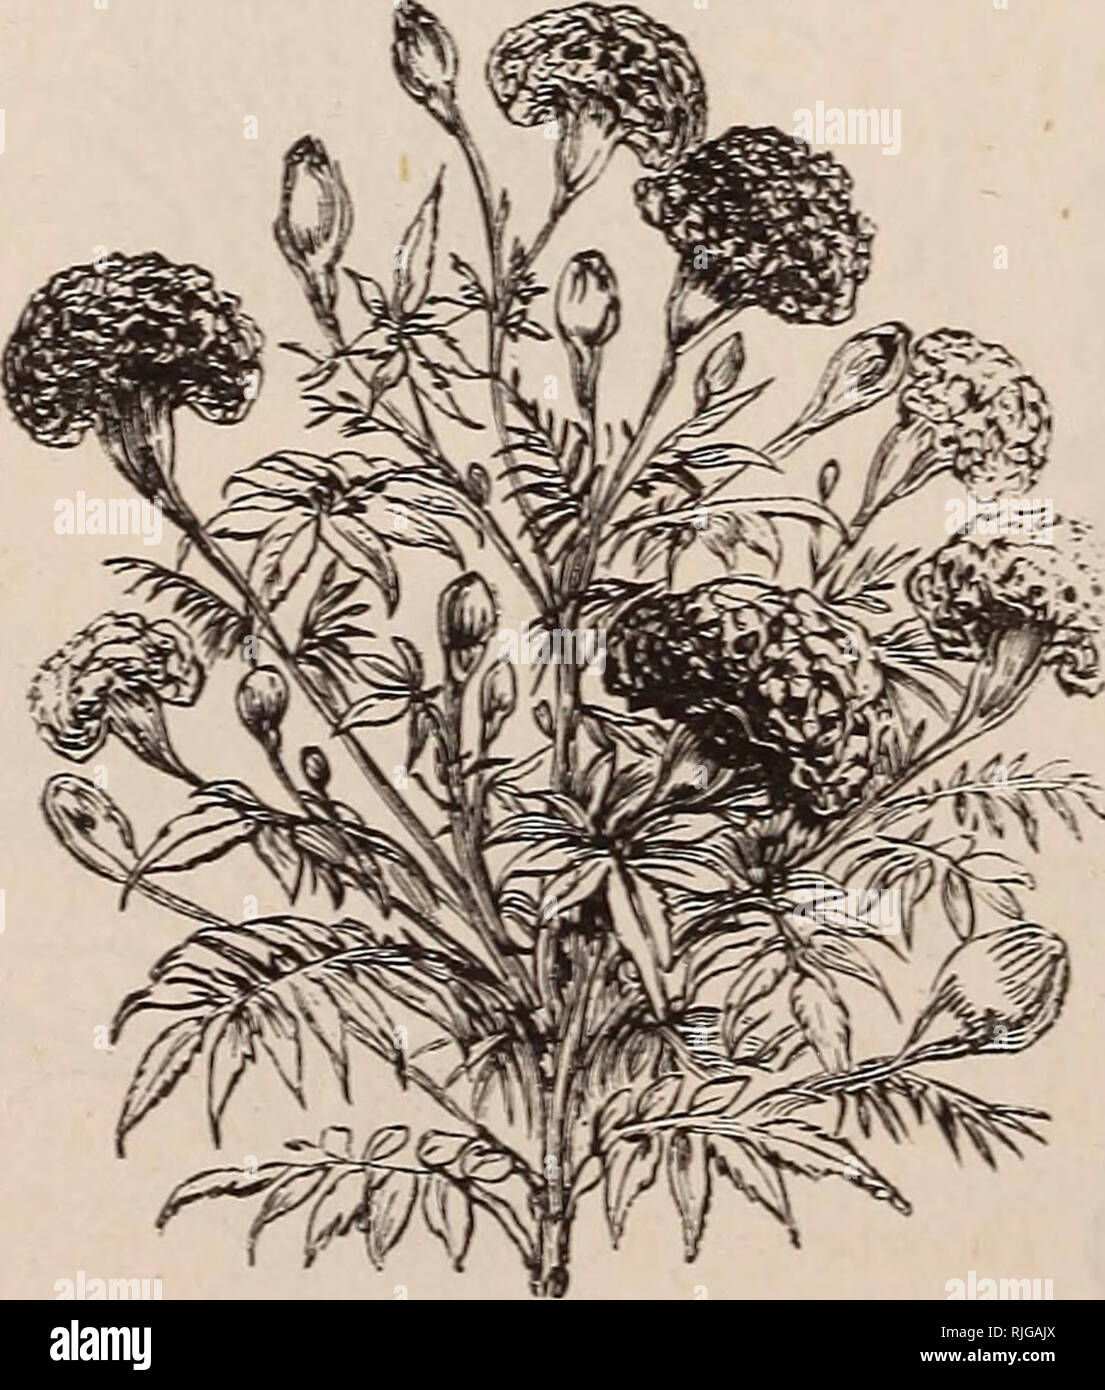 . Catalogue of trees, shrubs, vines, garden and house plants, bulbs, seeds, &amp;c.. Nursery stock Catalogs; House plants Catalogs; Trees Catalogs; Flowers Catalogs. MiMULL':. Marigold. Price Scabiosa major, H.H., P., (Mourning Bride) mixed, 2 feet . fi., pi., new double mixed Schizanthus, H.H., A., fine mixed Stock, (Gilliflower), German. H.H., A., tine mixed ..... large flowering, 10 weeks, mixed 10 weeks, mixed . — Florist's white .... Sunflower. (See Helianthus). Sweet Clover, Trifolium suaveolens Sweet William, H.P., fine mixed double mixed .... Hunt's Rose-Edged, mixed Thunbergia, H.K.,  Stock Photo